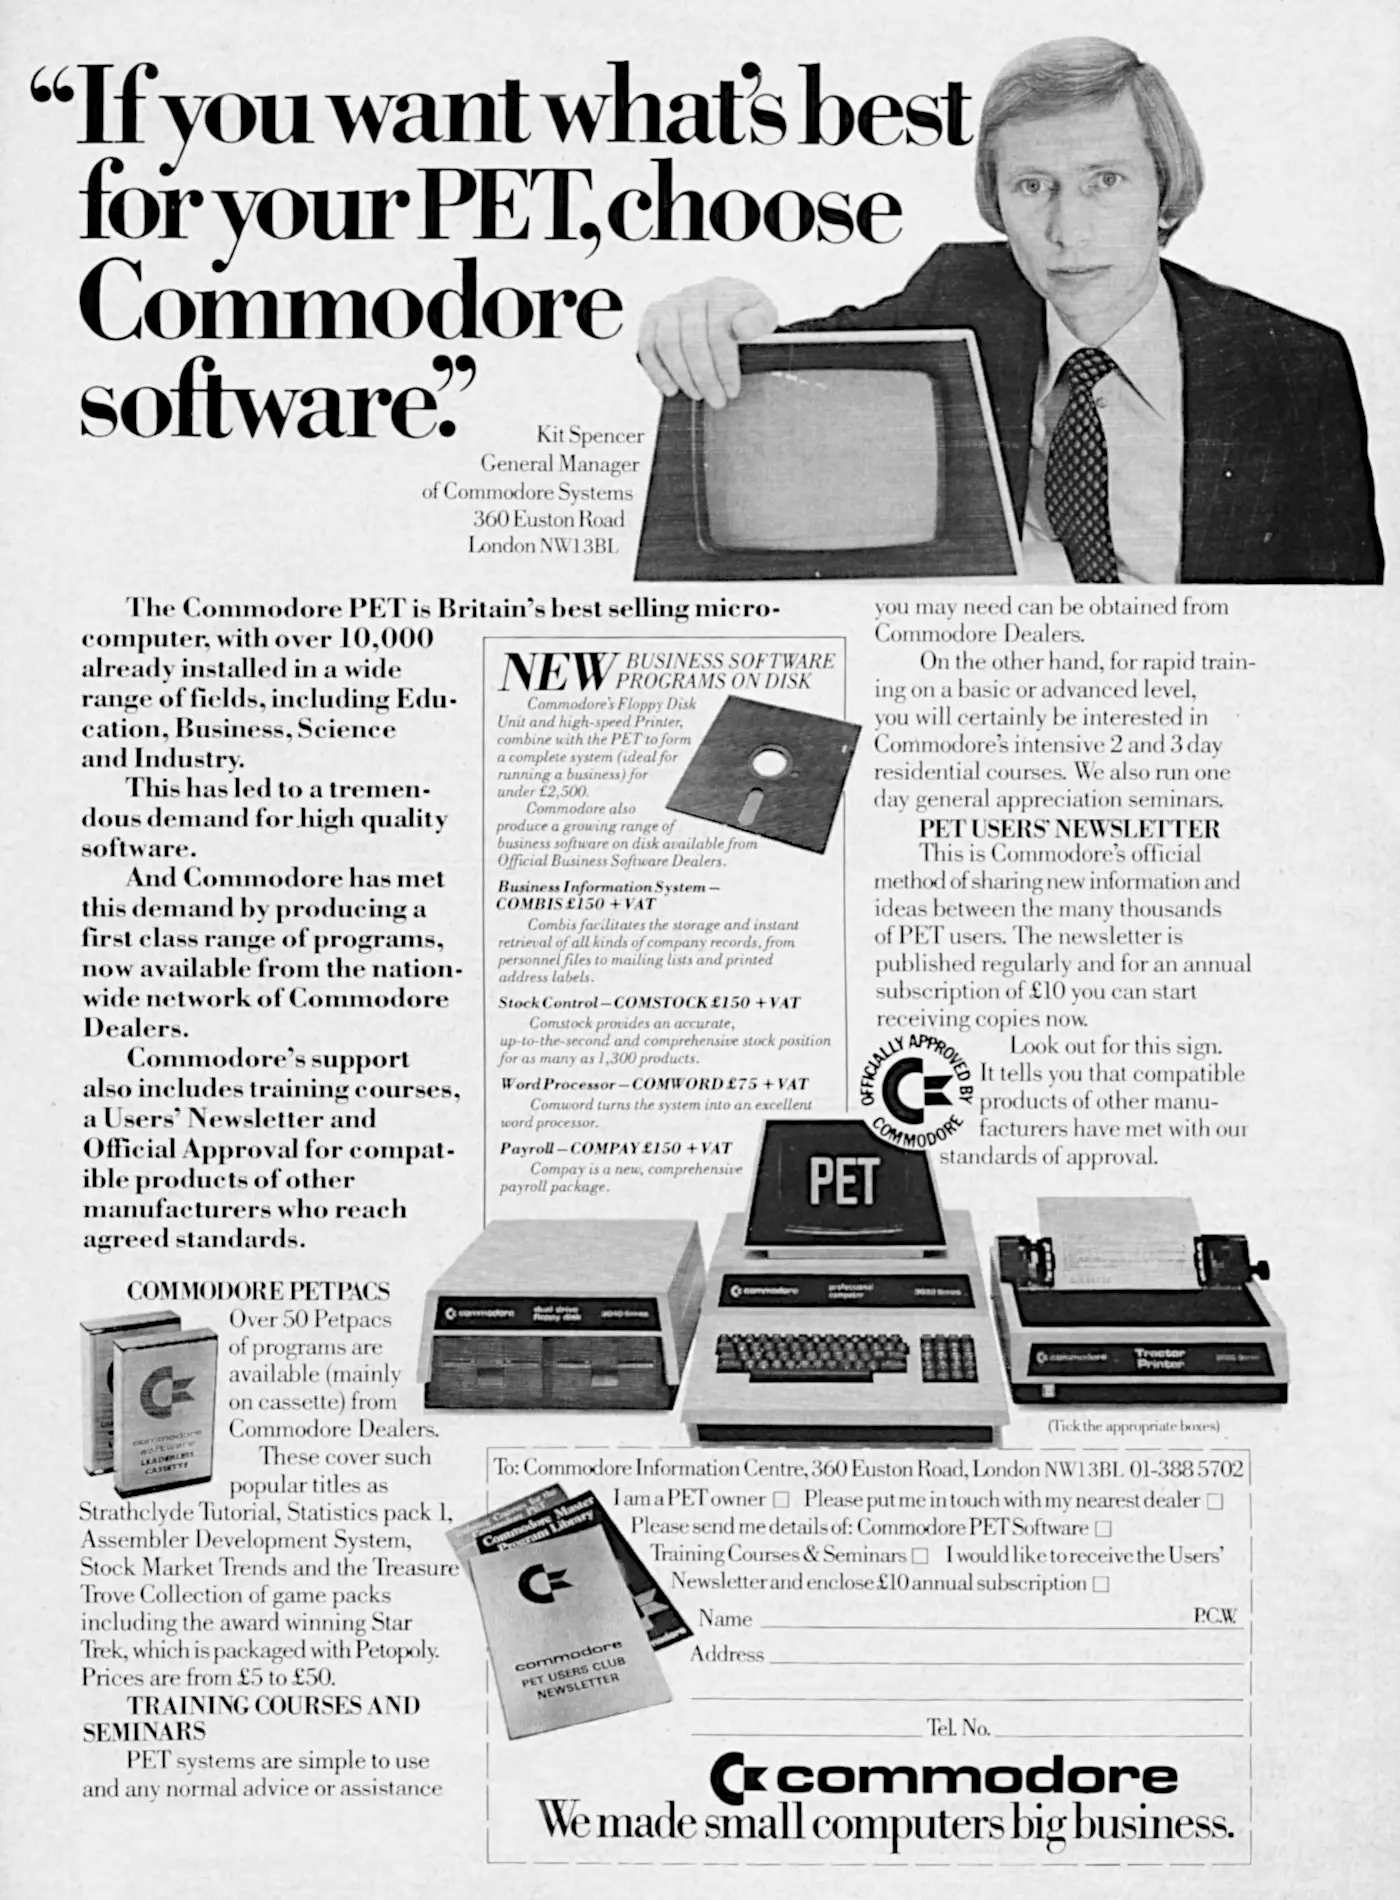 Commodore Advert: If you want what's best for your PET, choose Commodore software, from CPUCN - Commodore PET Users' Club Newsletter, Vol 2 Issue 4, January 1980